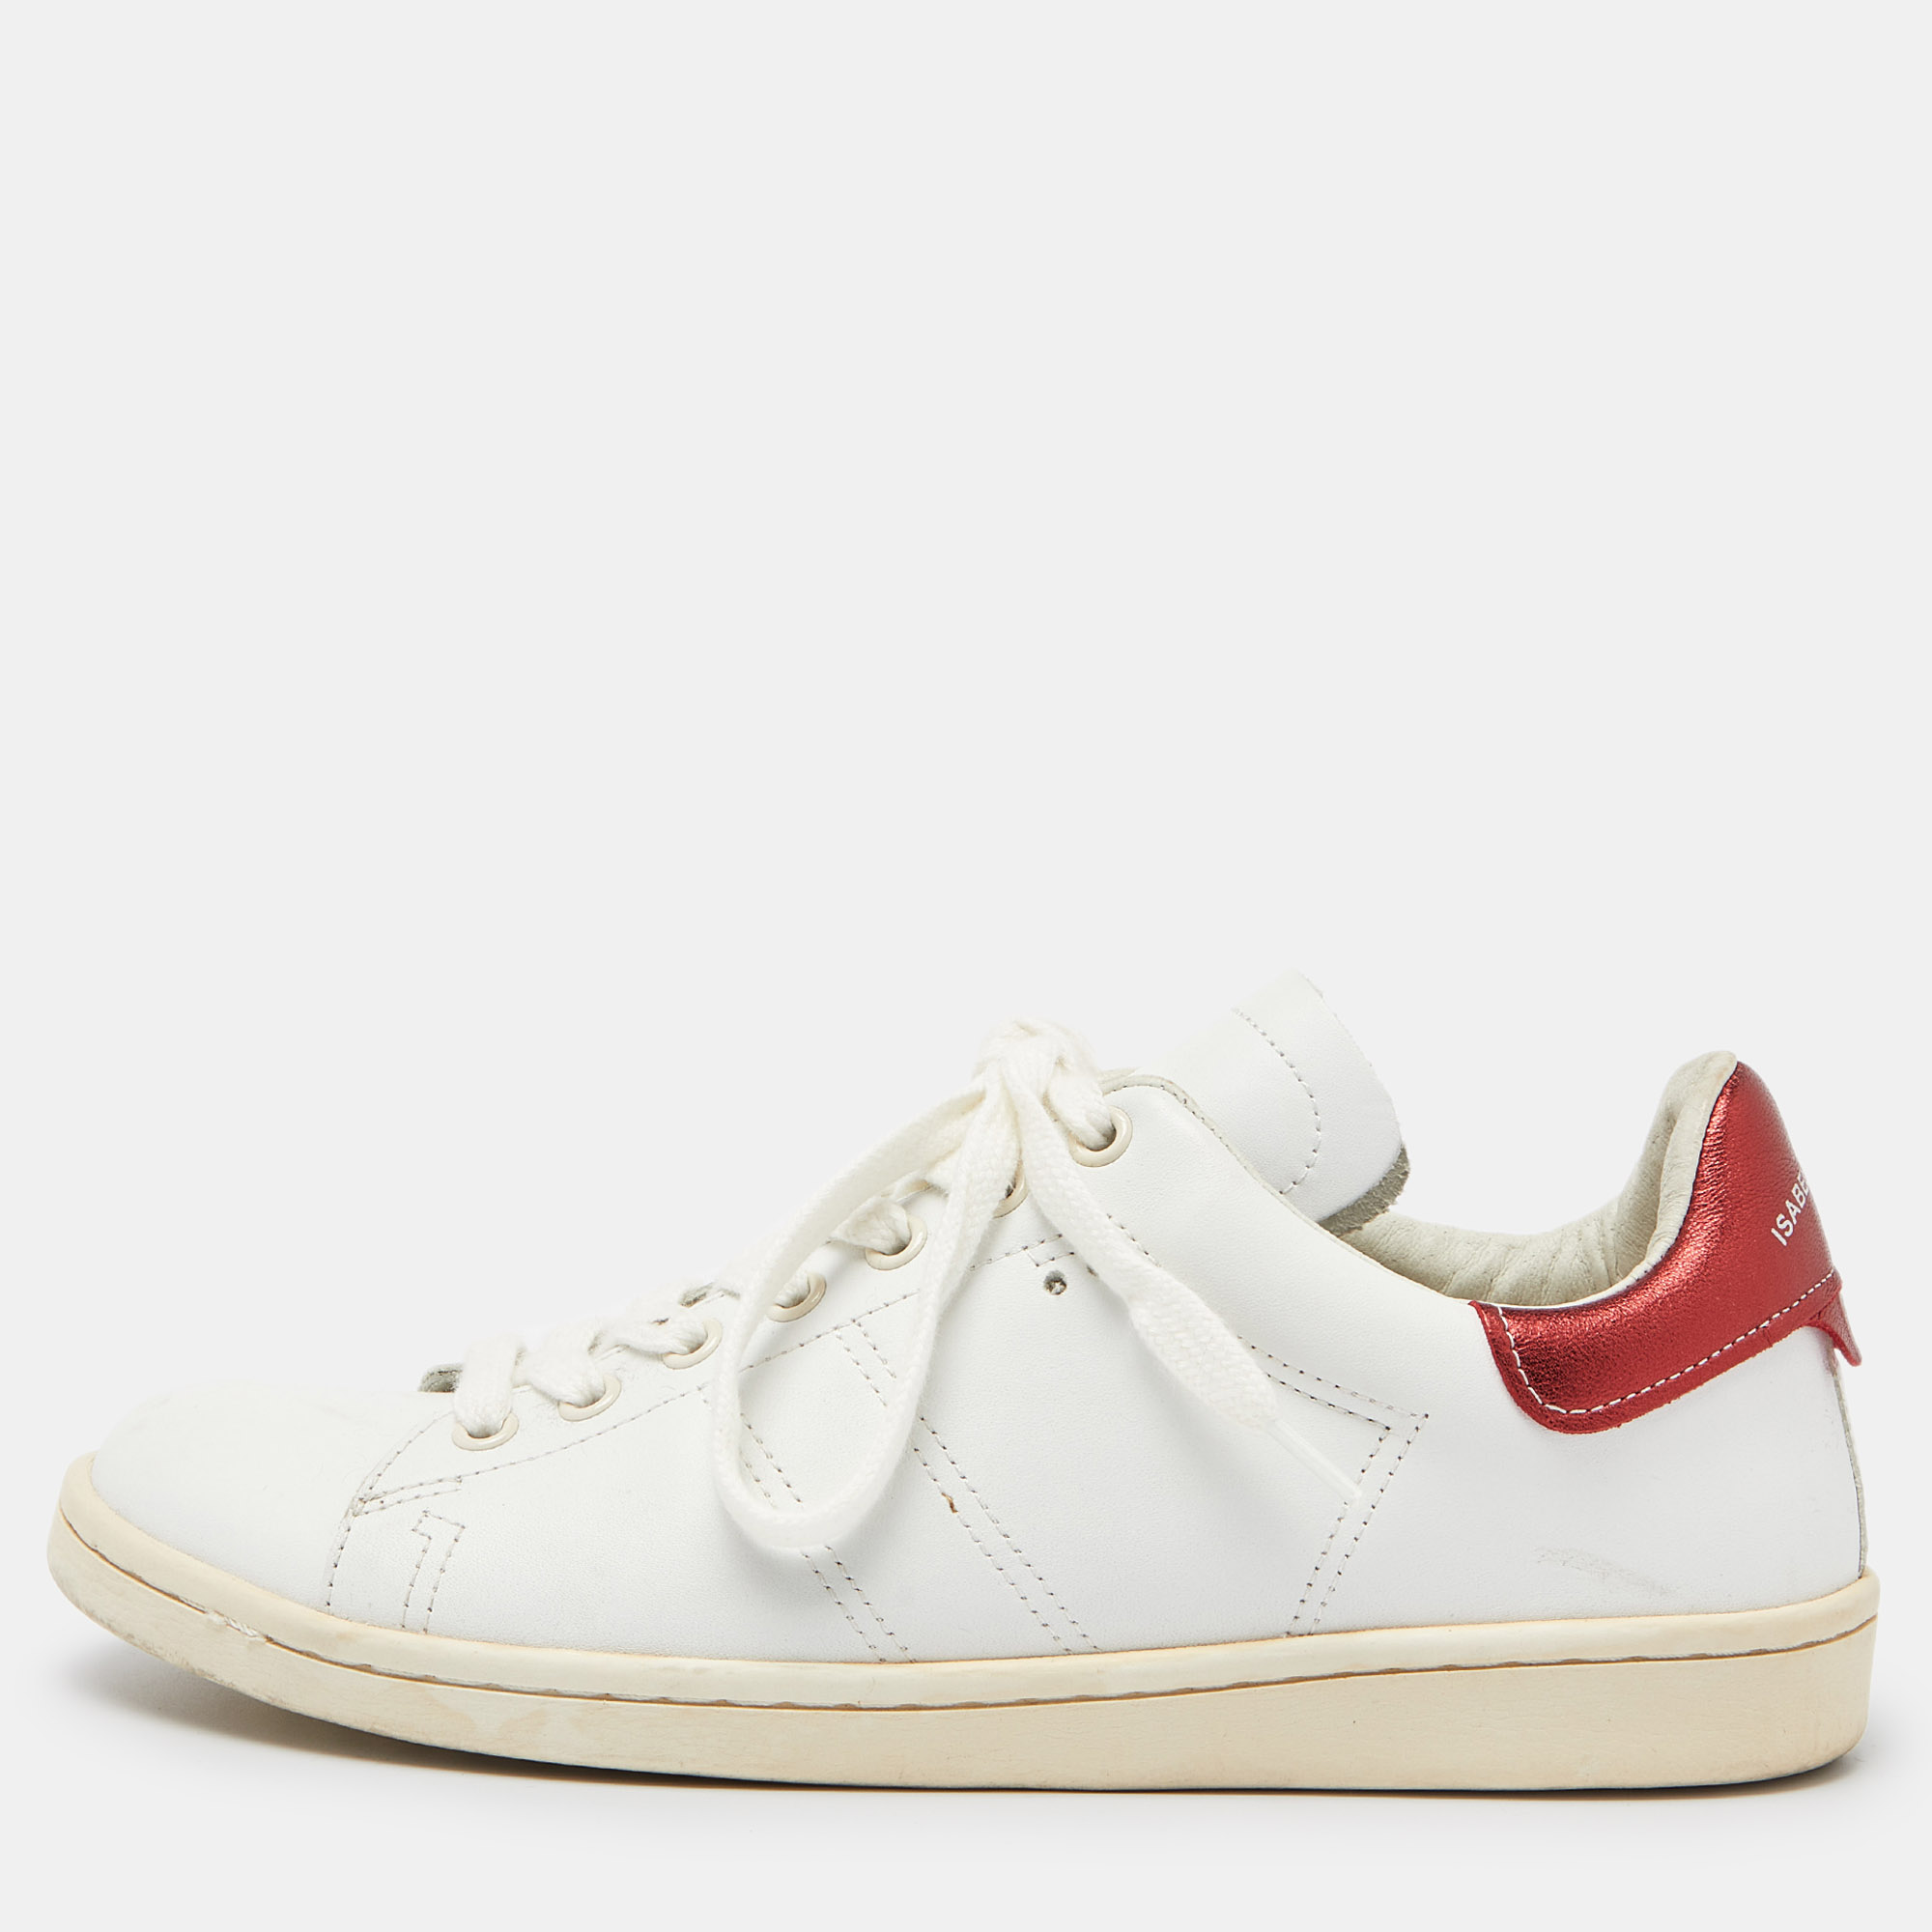 Pre-owned Isabel Marant White Leather Etoile Bart Low-top Sneakers Size 39